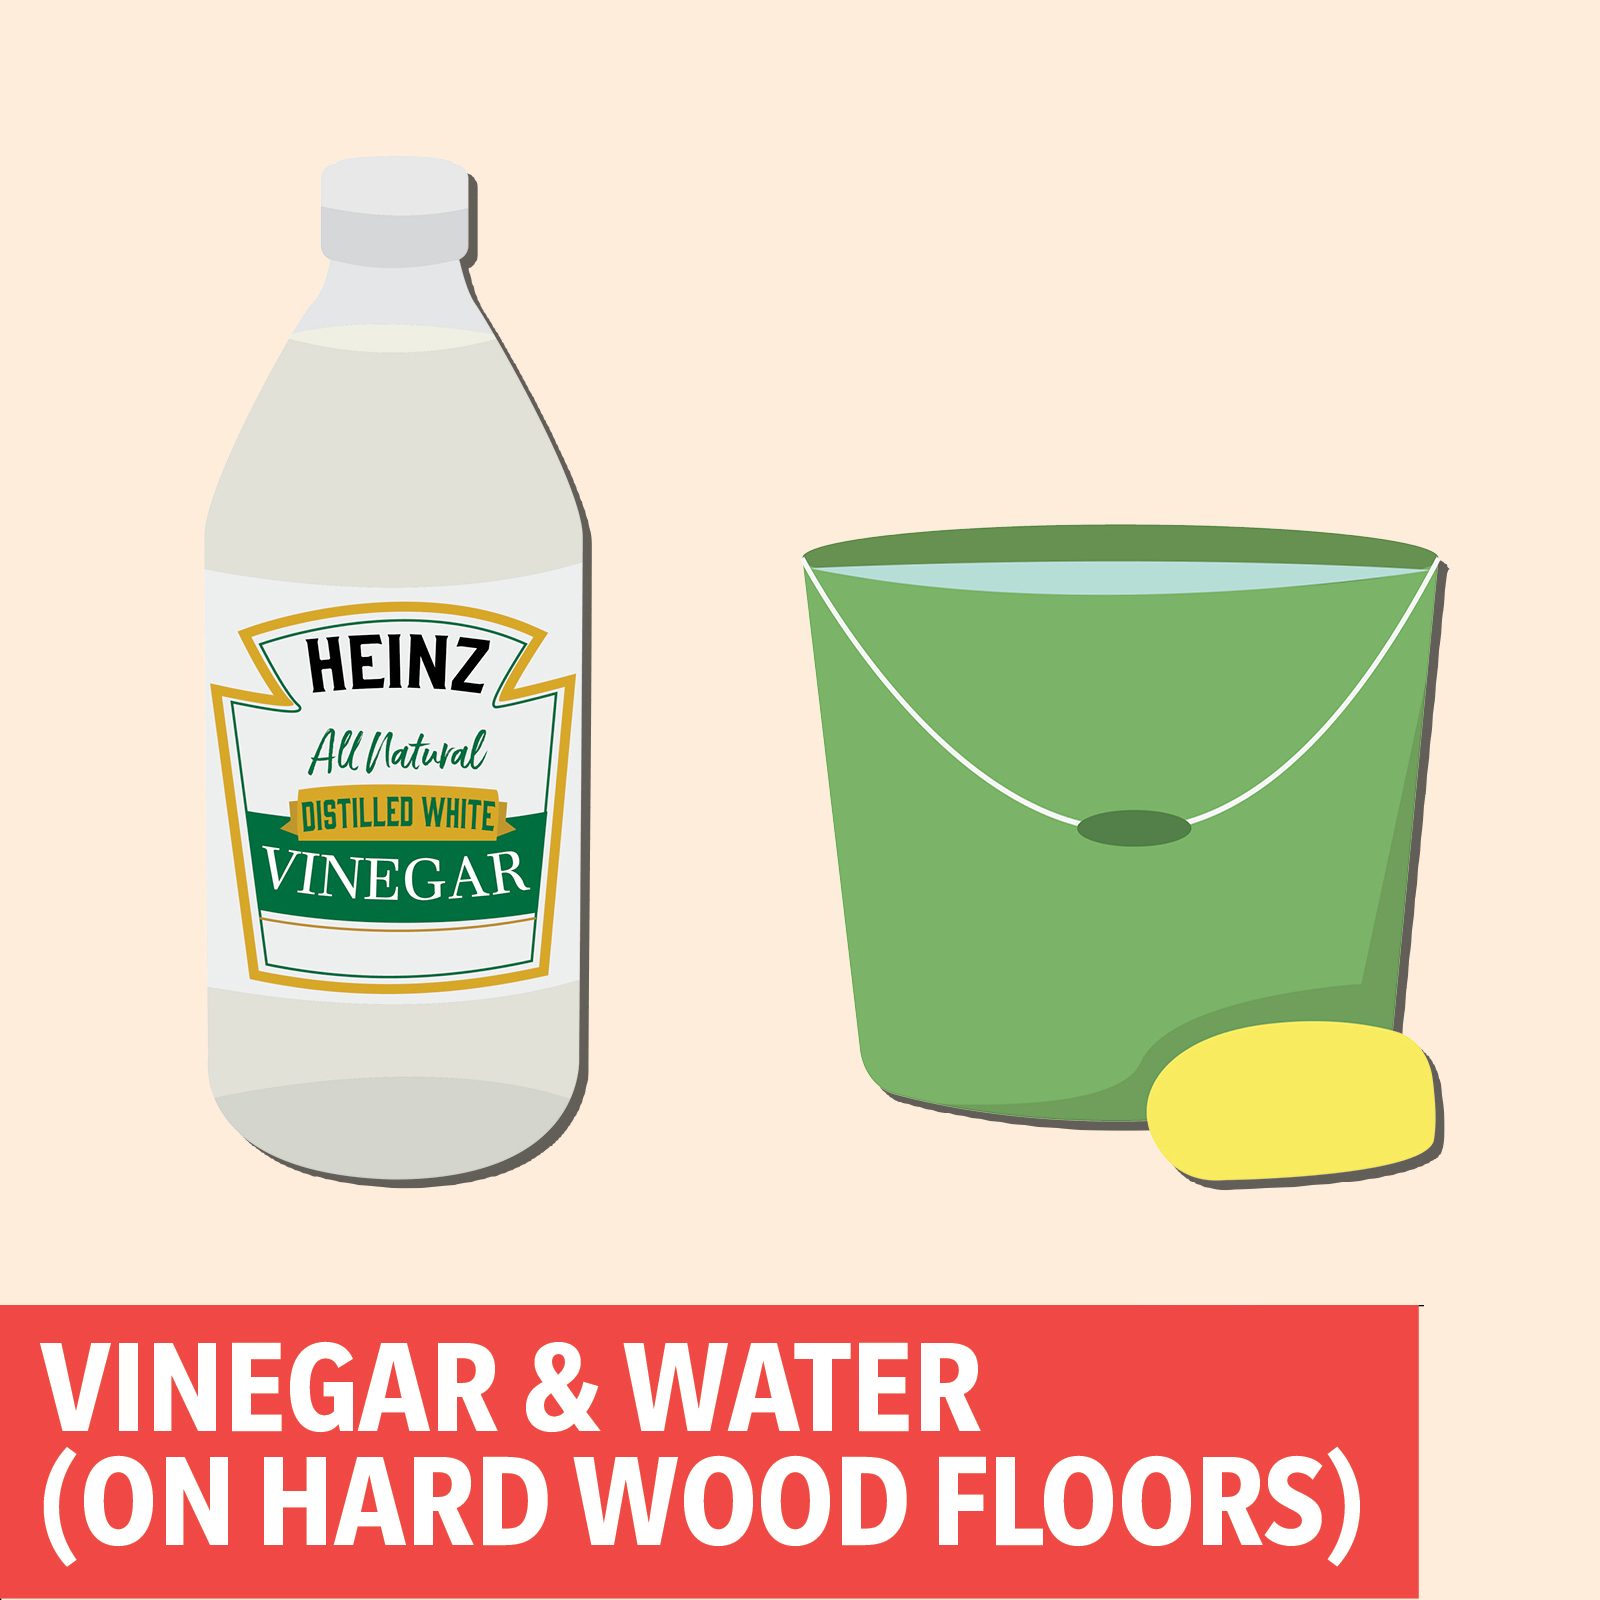 12 Household Cleaner Combinations You Should Never, Ever Mix